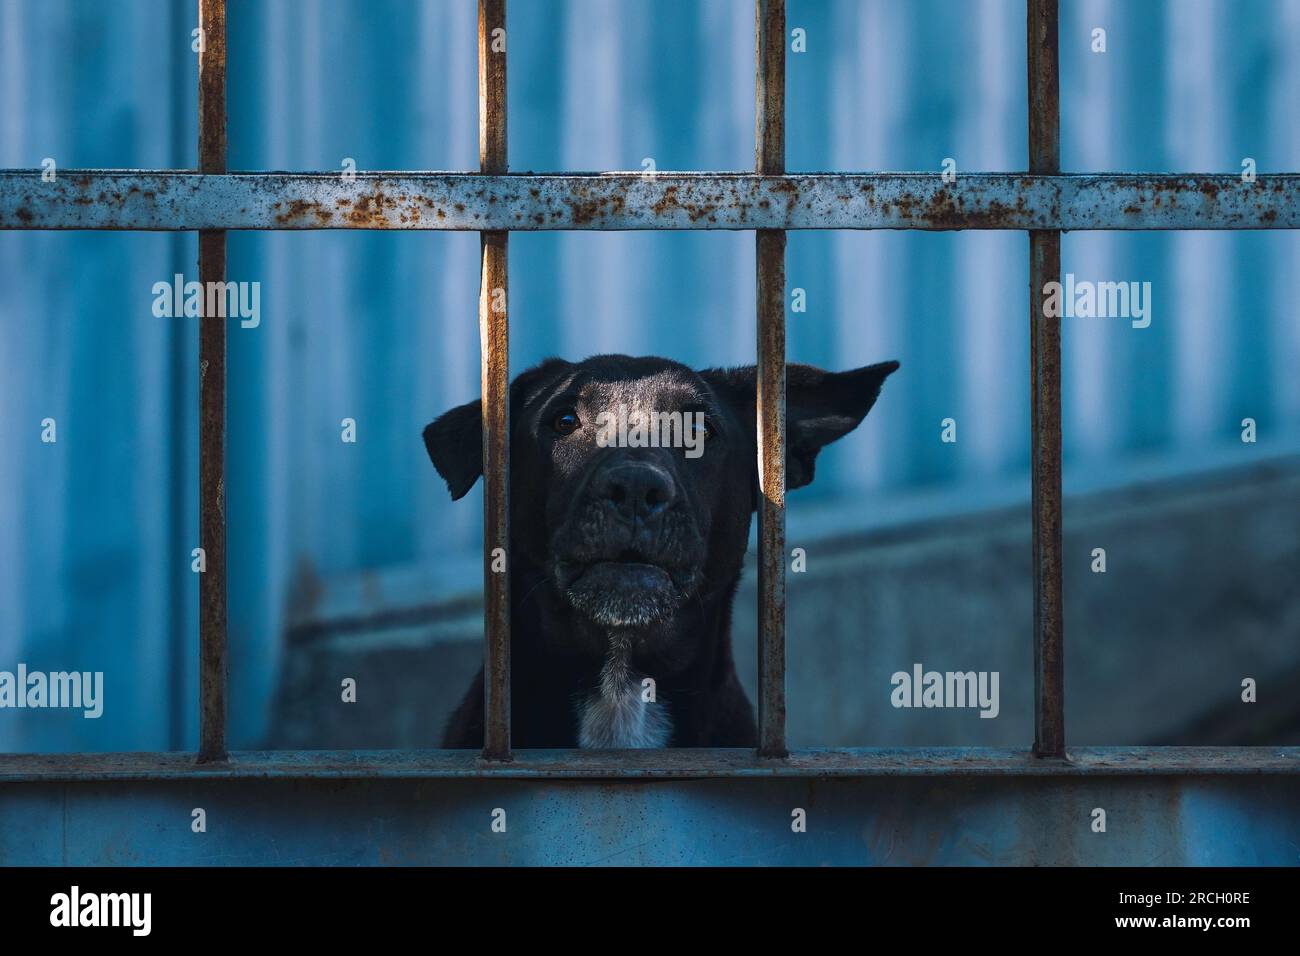 A cute black dog face behind bars. A life of ill will Stock Photo